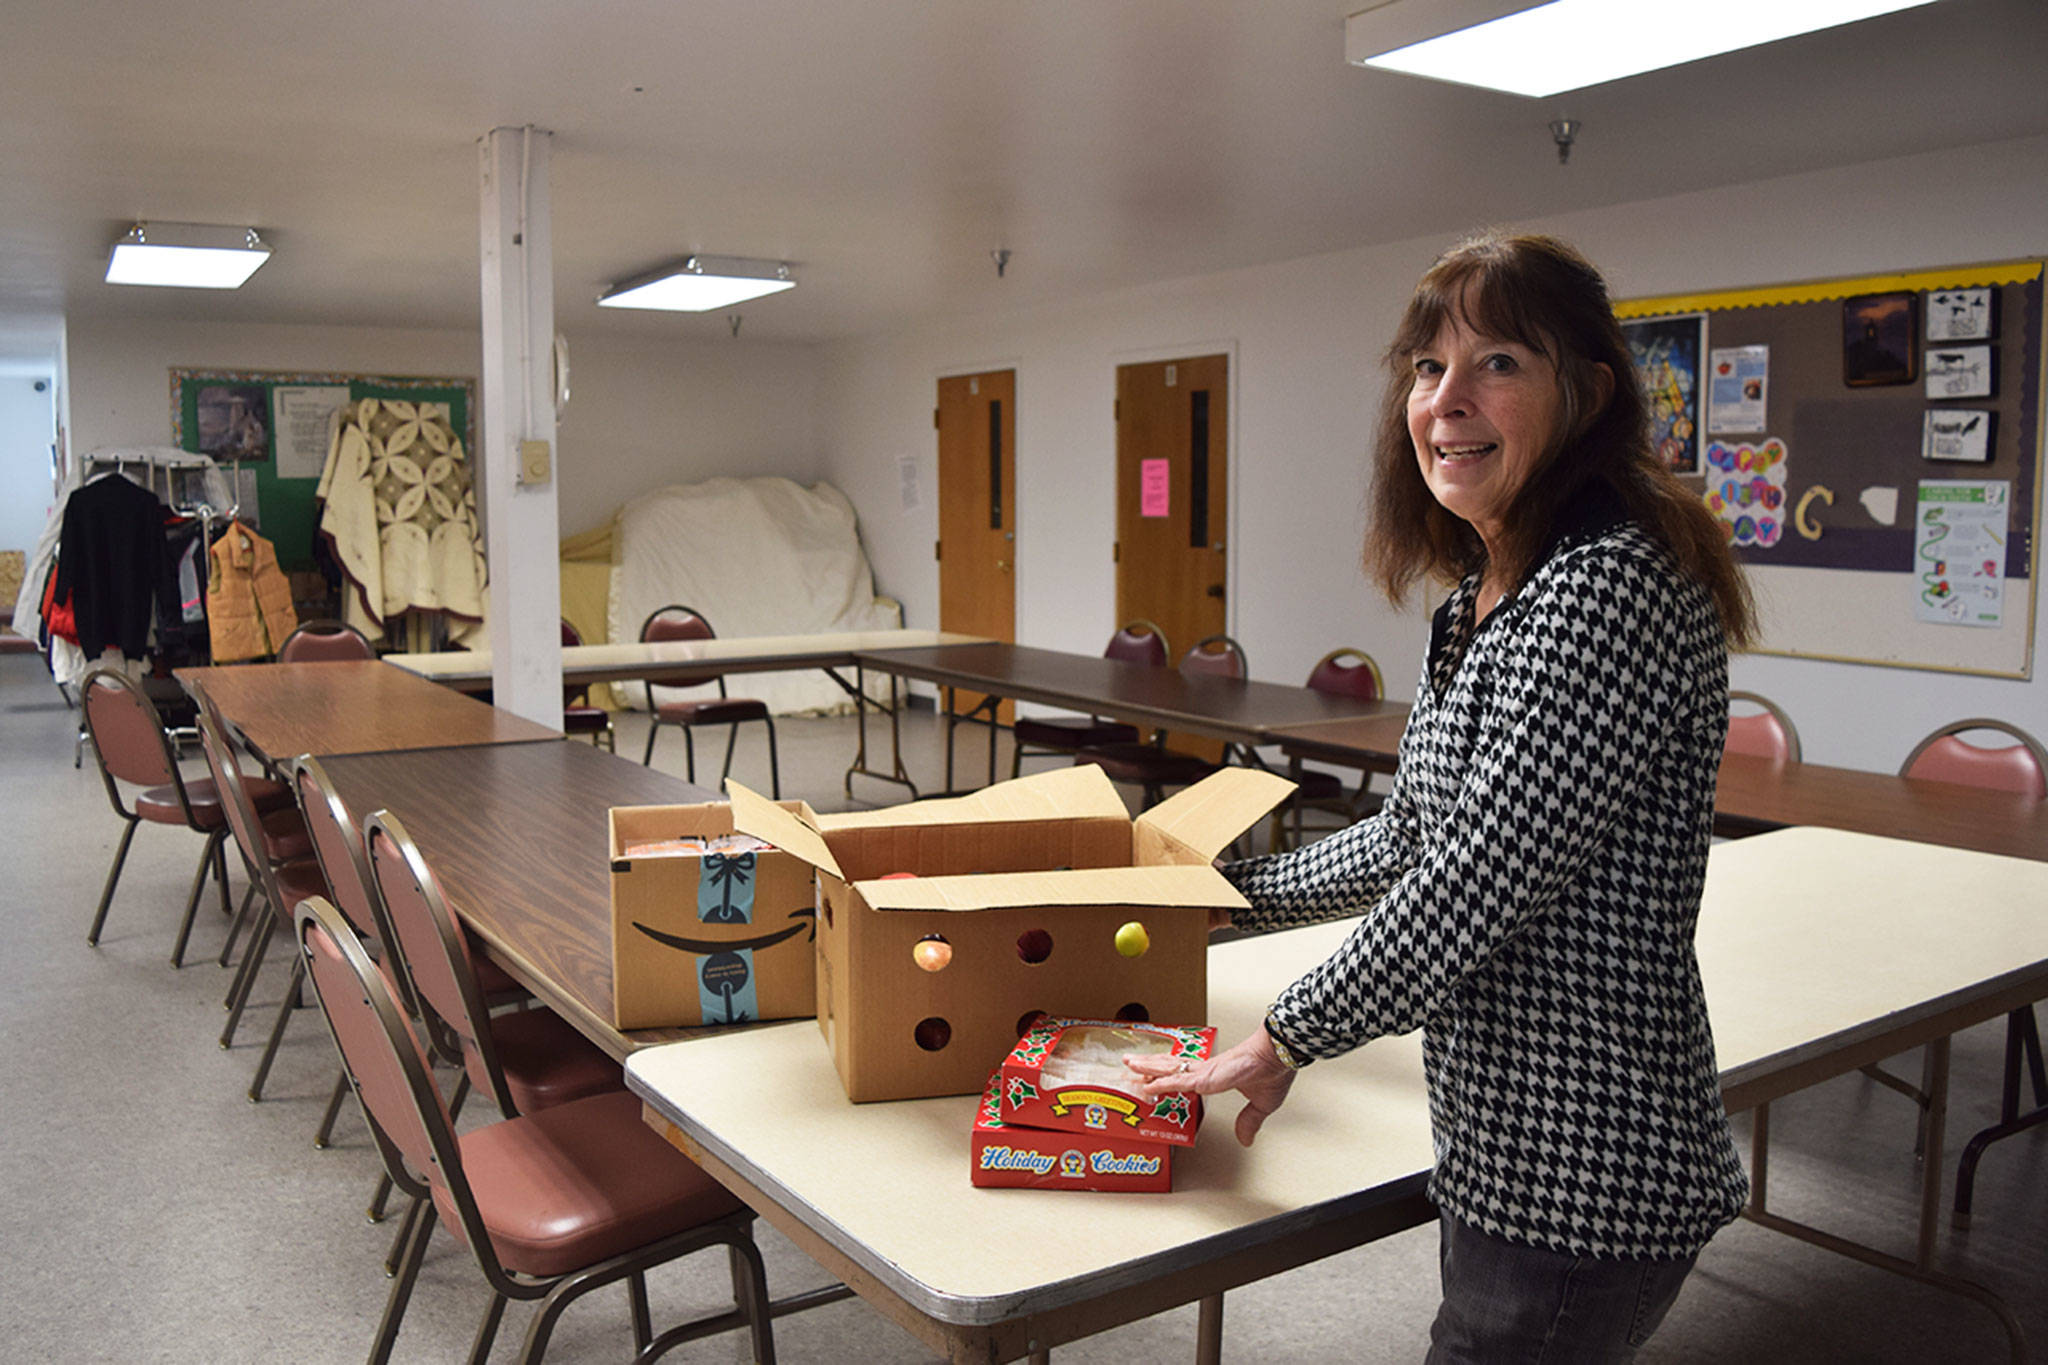 Jean Pratschner, volunteer coordinator for the Sequim Community Warming Center, unpacks donated snacks and goodie bags to give out at the center on Jan. 28. Starting Friday, Feb. 1-Sunday, March 31, the center will be open 9 p.m.-7 a.m. every night. Sequim Gazette photo by Erin Hawkins